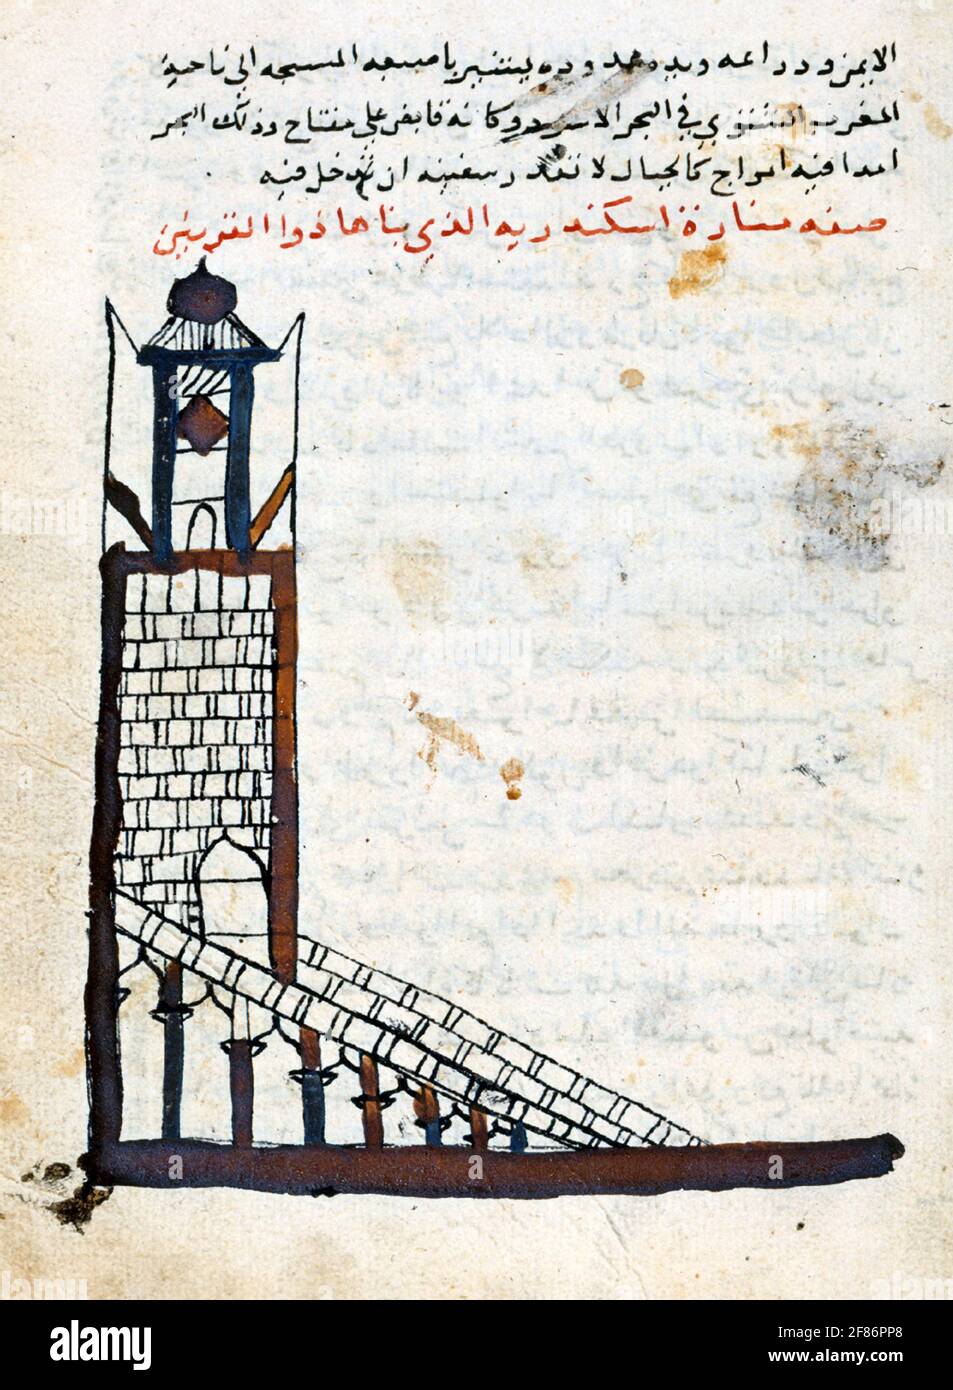 6849. The lighthouse of Alexandria (Egypt). Illustration from a manuscript by Abu Hamid Al-Gharnati dating 12th. C. Stock Photo